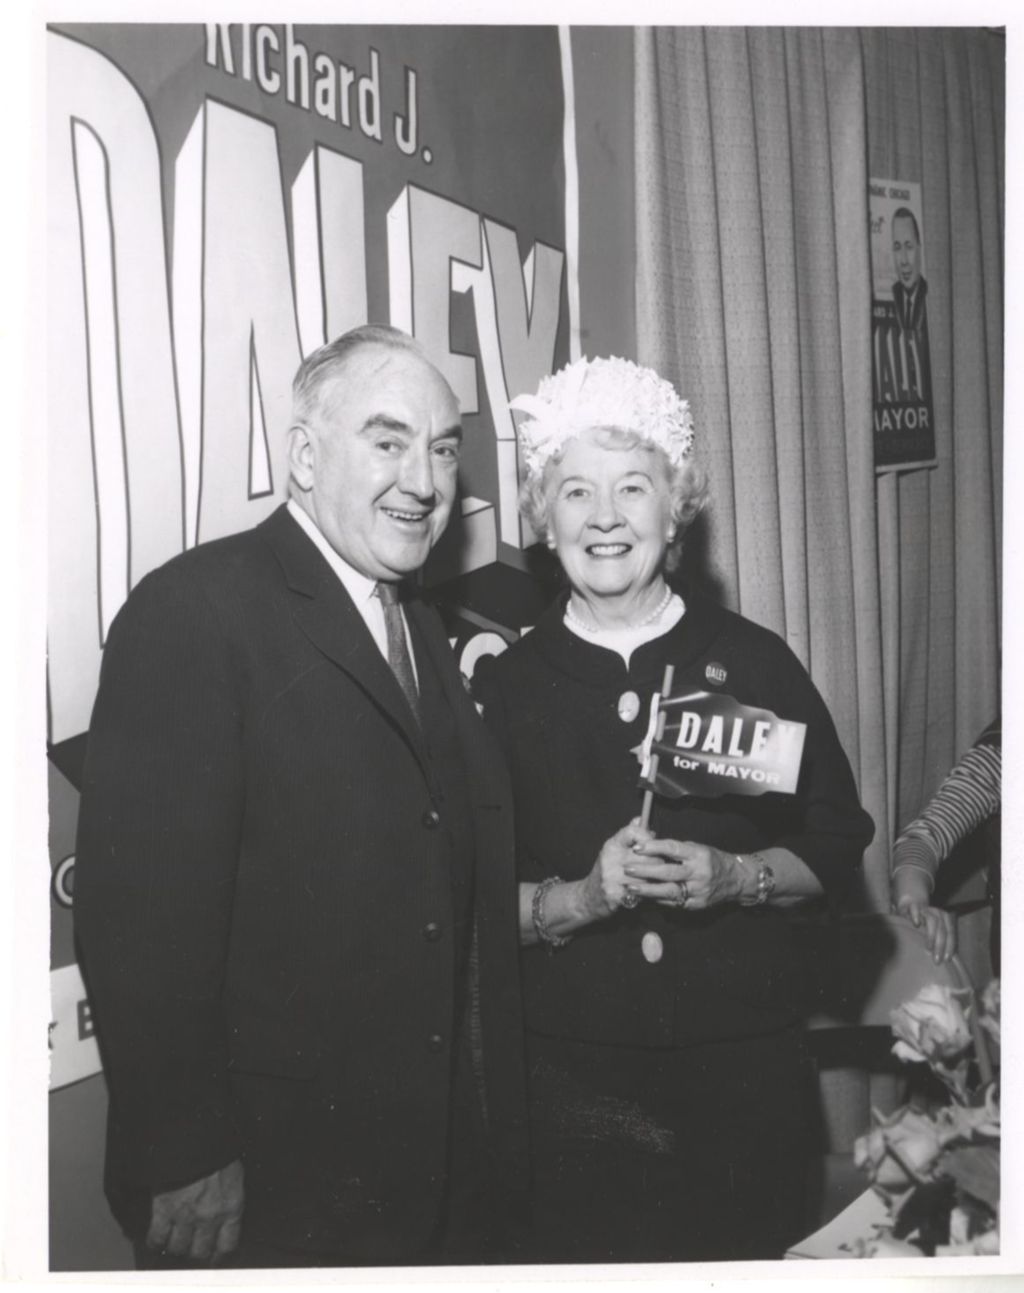 William Lynch and a Daley supporter at a campaign event